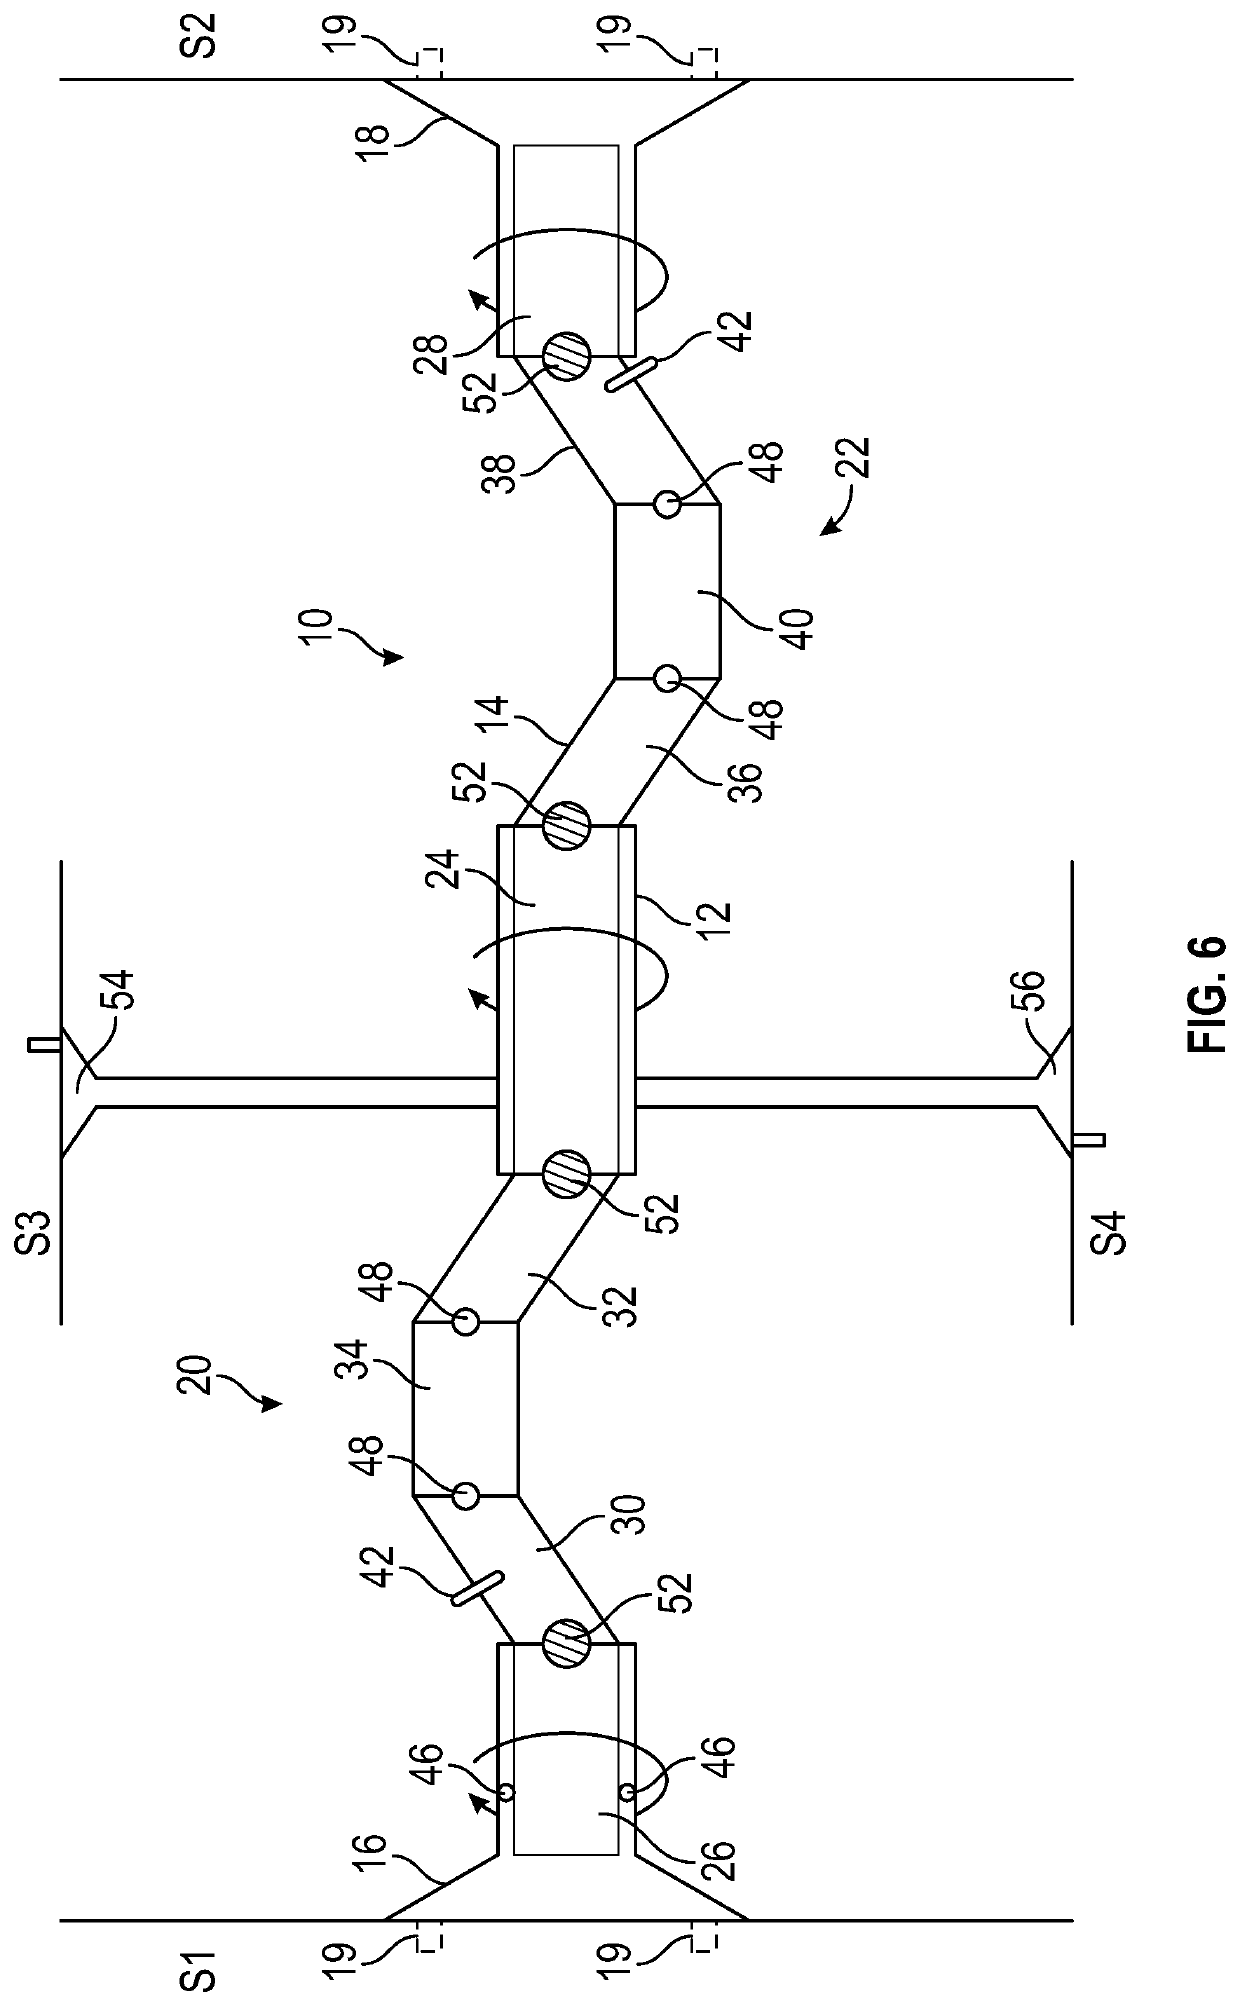 Exercise Device and Method